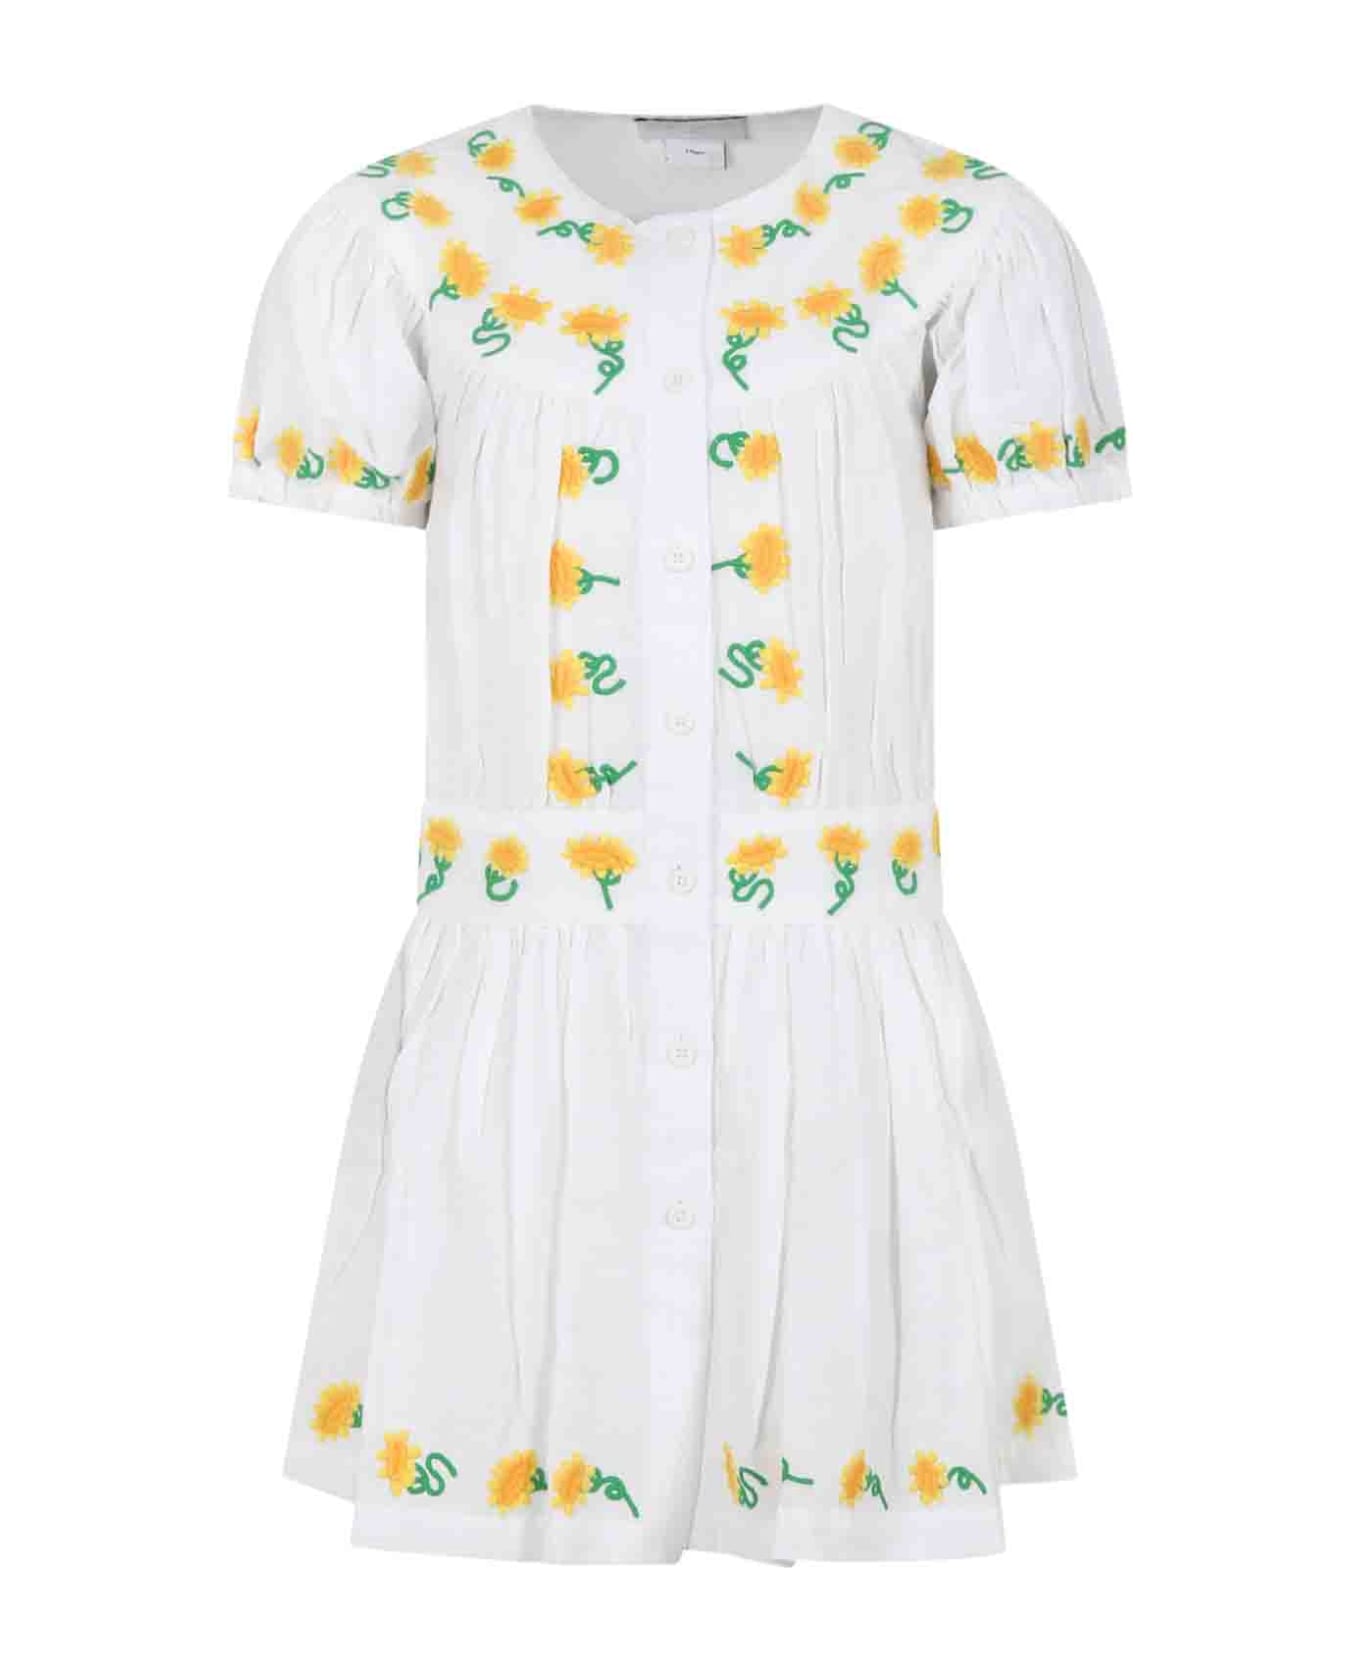 Stella McCartney Kids White Dress For Girl With Embroidered Sunflowers - White